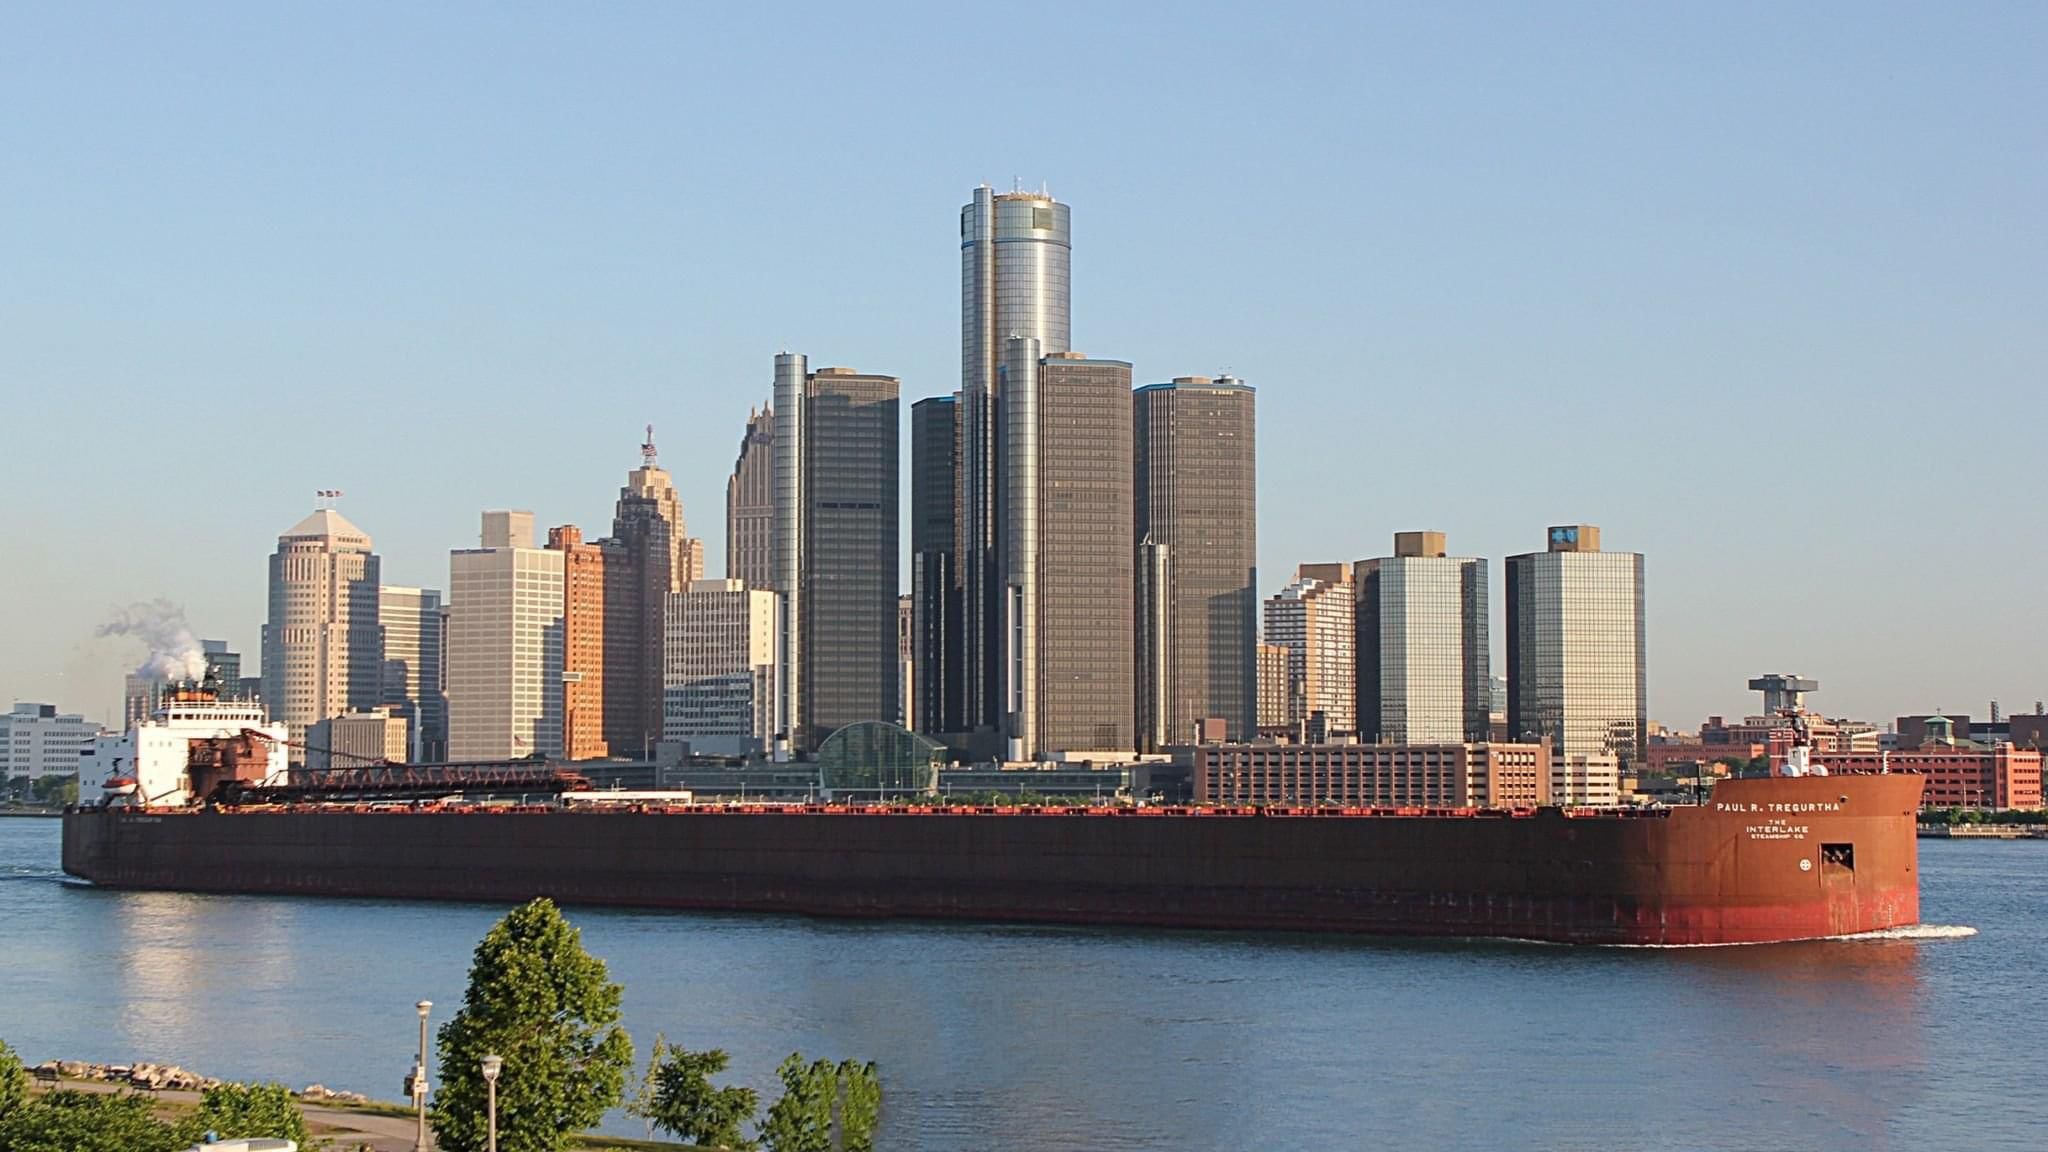 The city of Detroit is repossessed after filing bankruptcy, 2013.